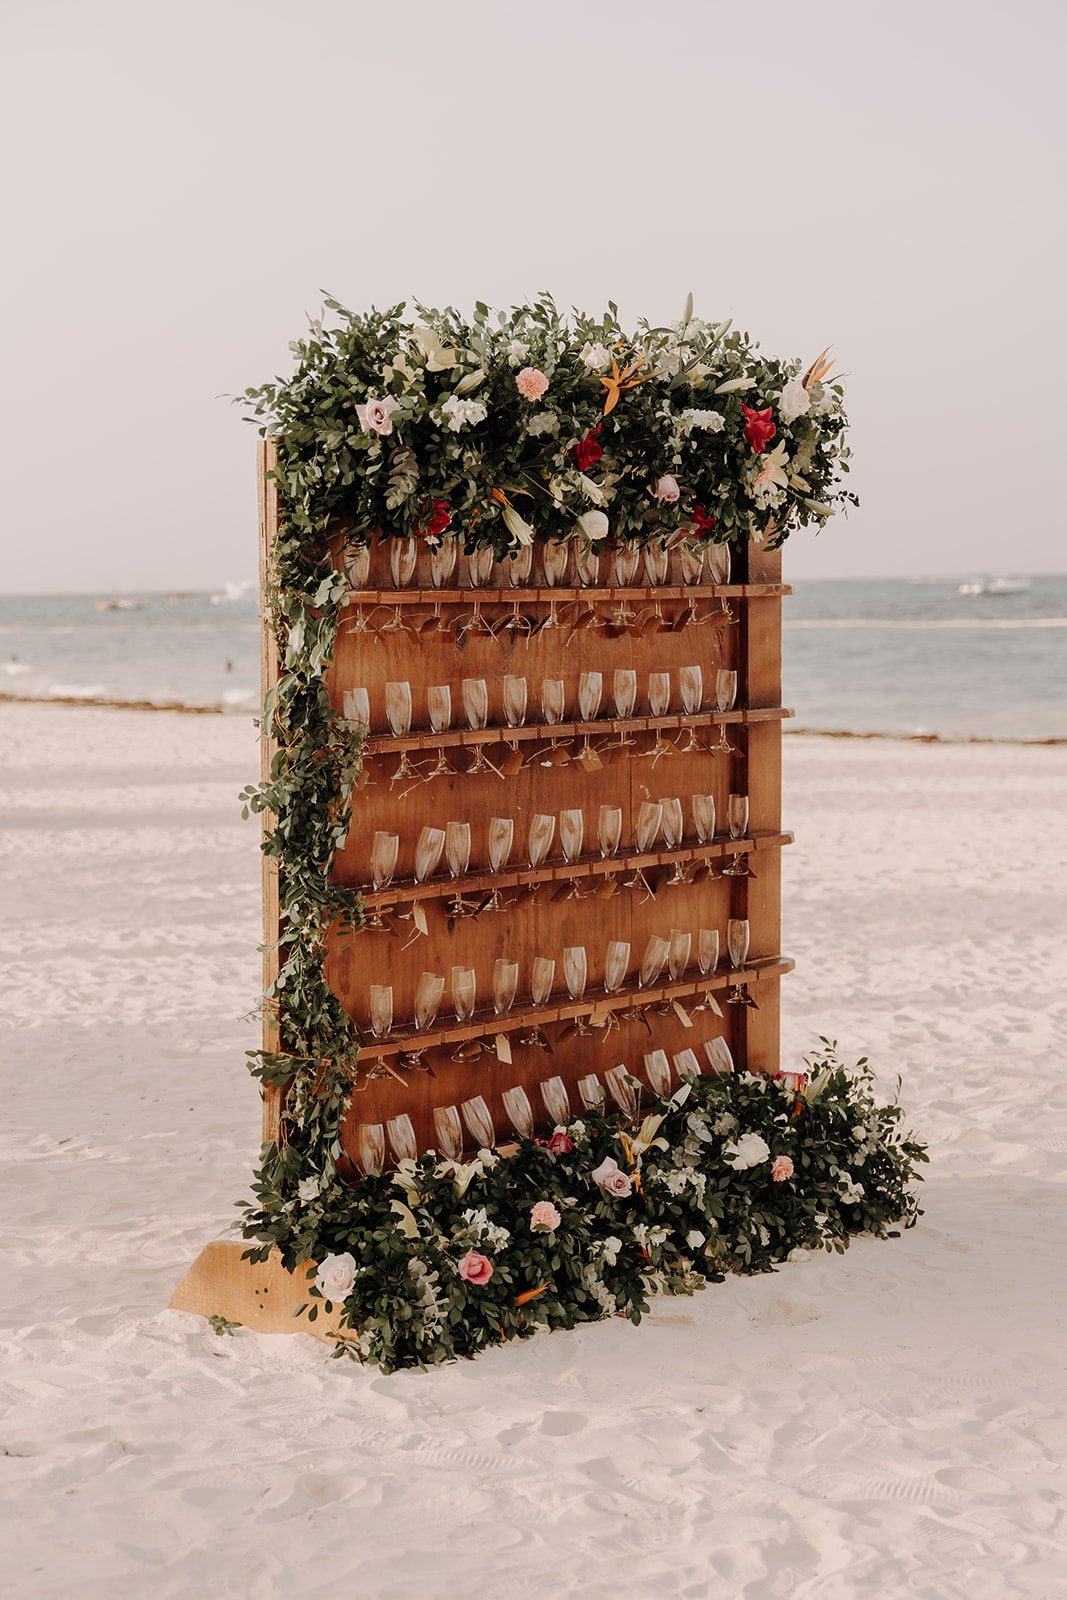 Drink wall at destination wedding in the Dominican Republic